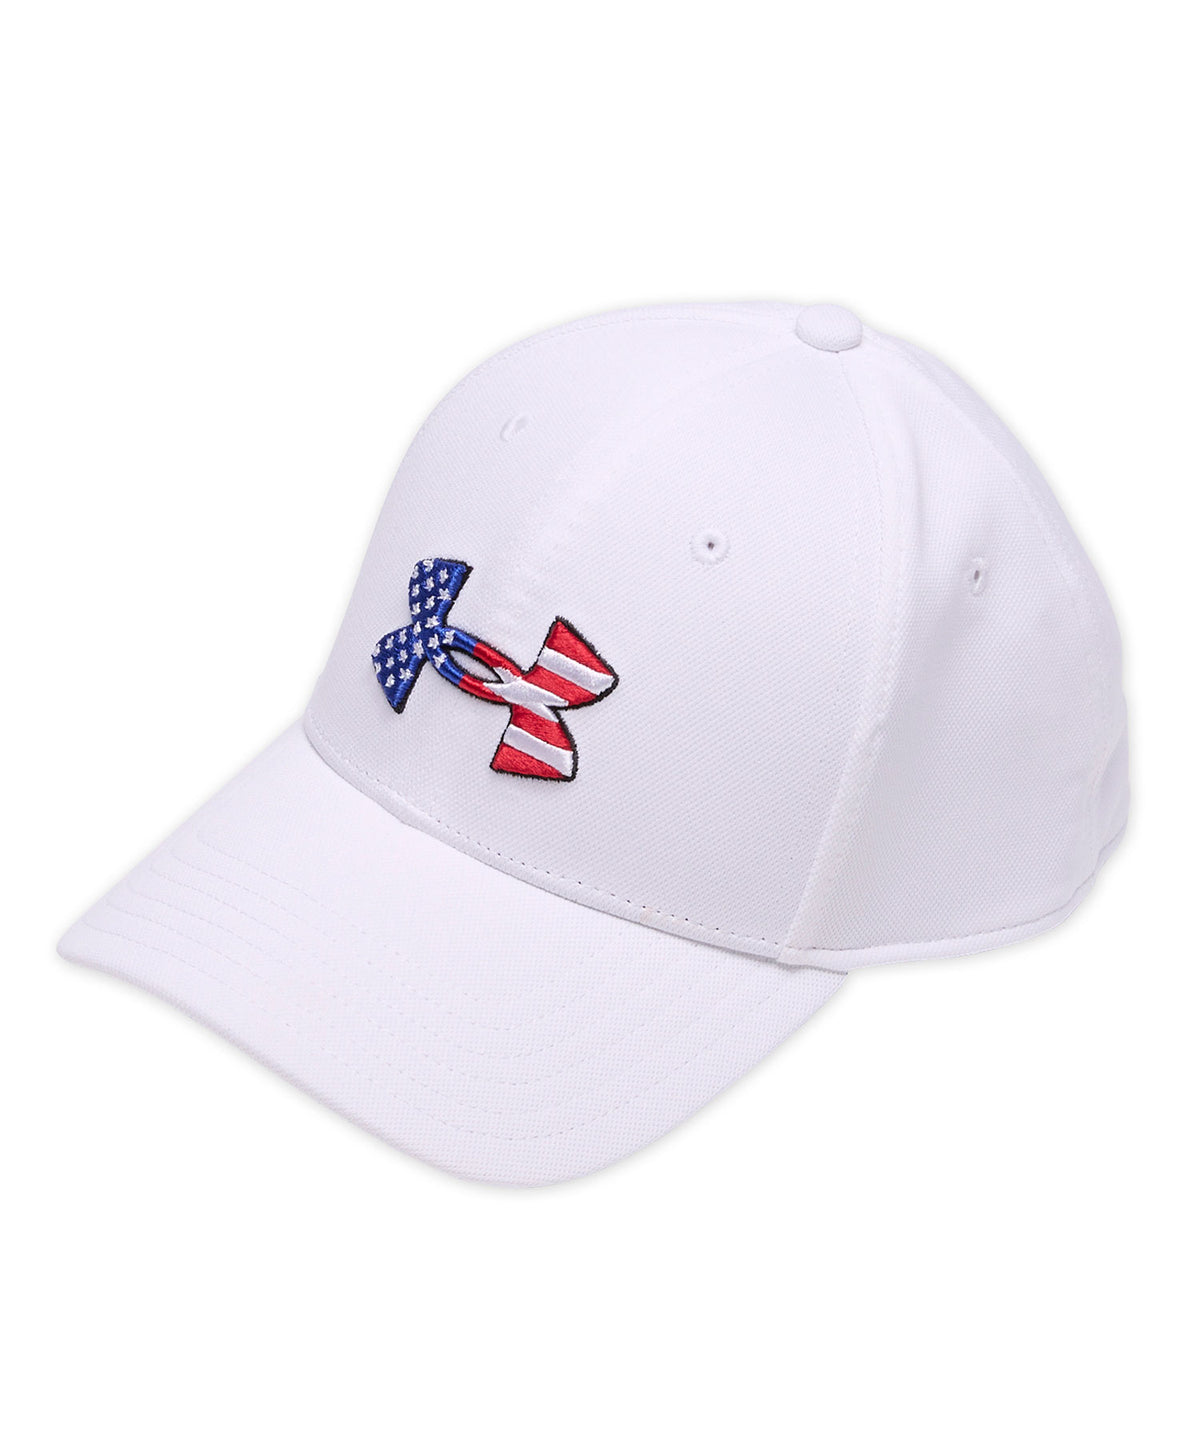 Under Armour Freedom Blitzing Hat, Men's Big & Tall